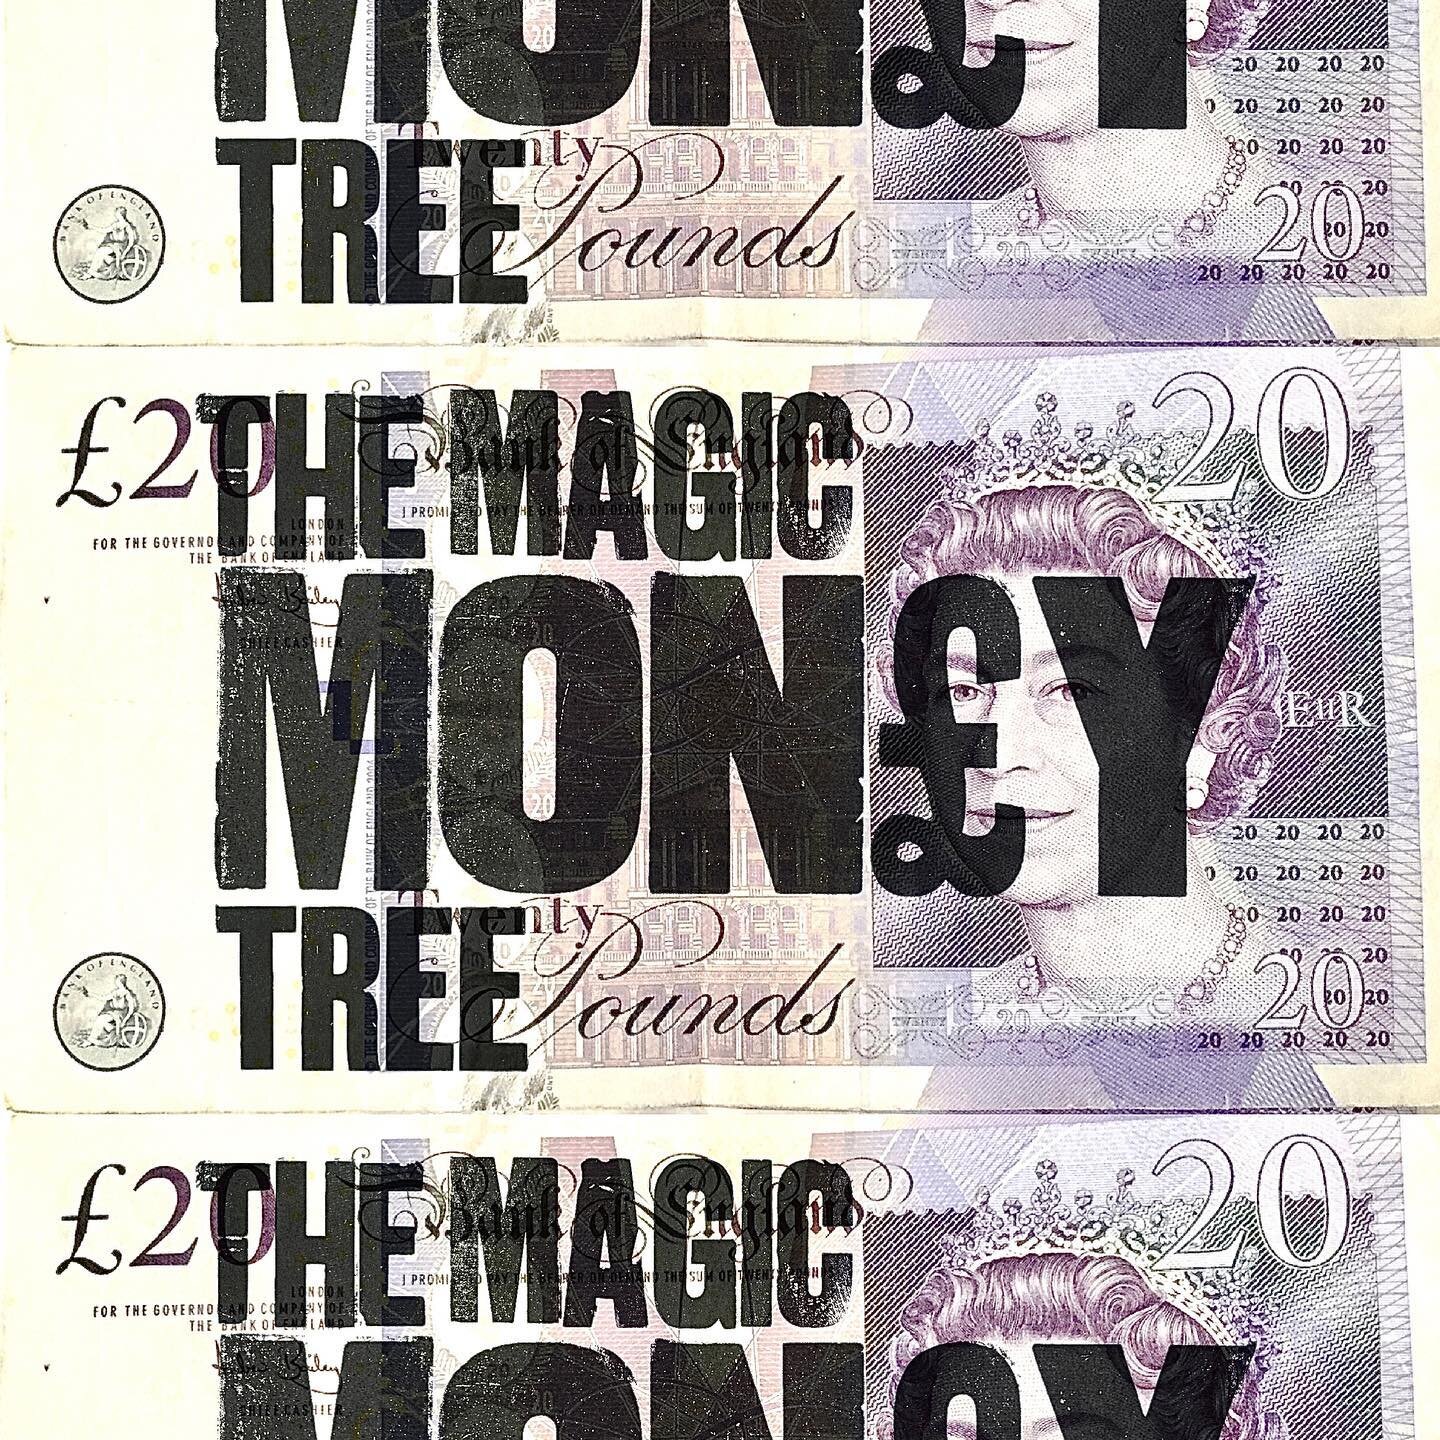 M is for The Magic Money Tree by Kirsty Mackay. Kirsty&rsquo;s Art Council Funded project is examining The Cost of Living Crisis and the impact on families. @kirstygmackay @36daysoftype #36daysoftype #36daysoftype_m #letterpress #money #woodtype #ban